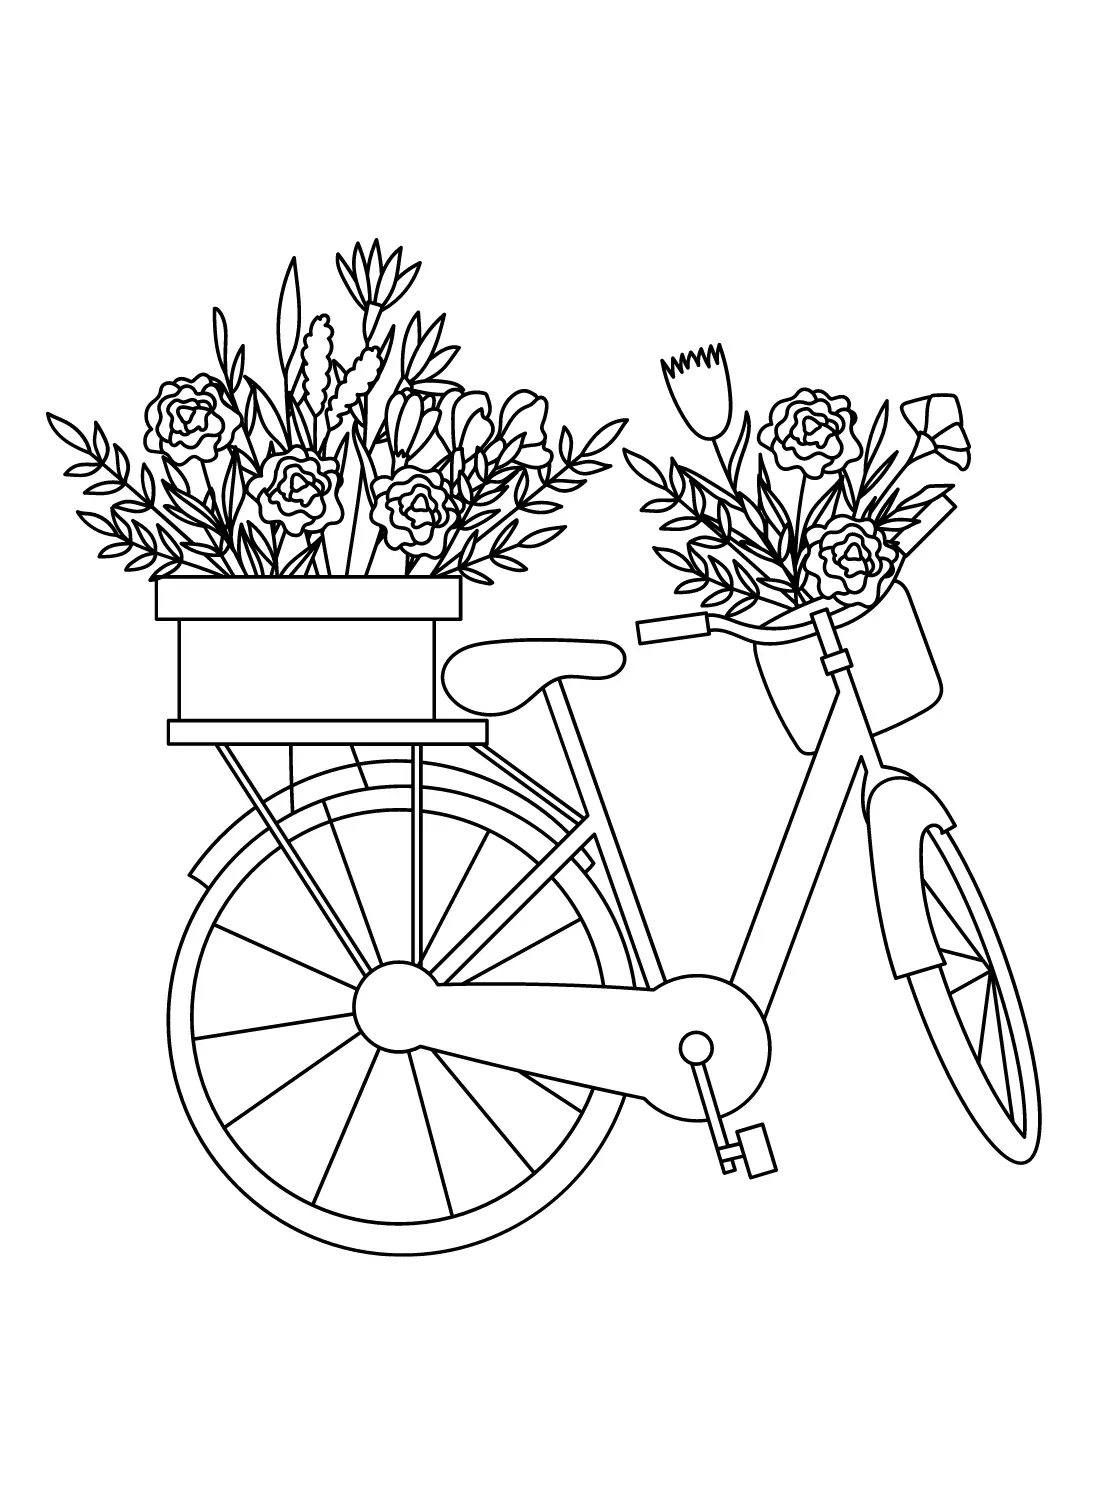 Bicycle Coloring Pages